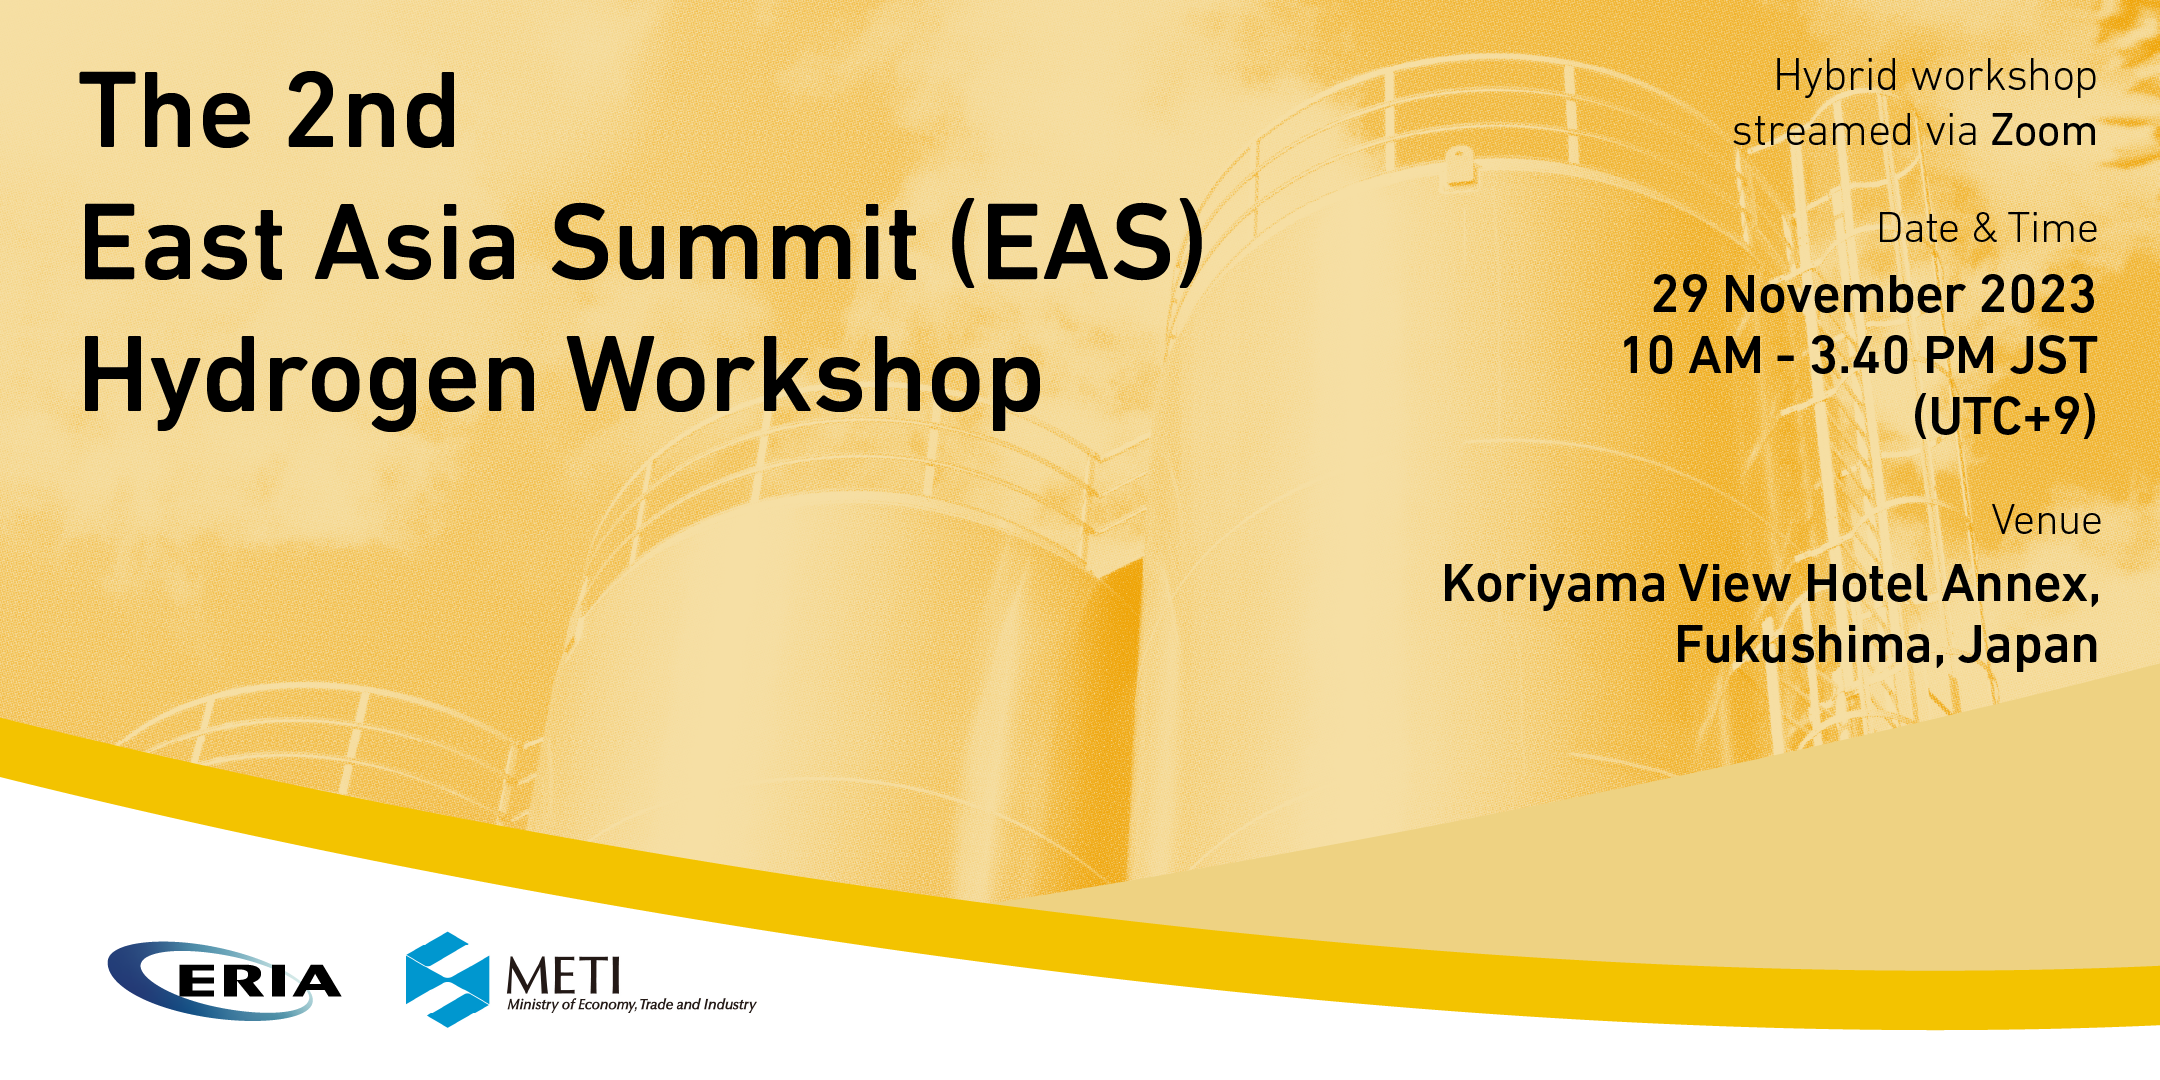 The 2nd East Asia Summit (EAS) Hydrogen Workshop